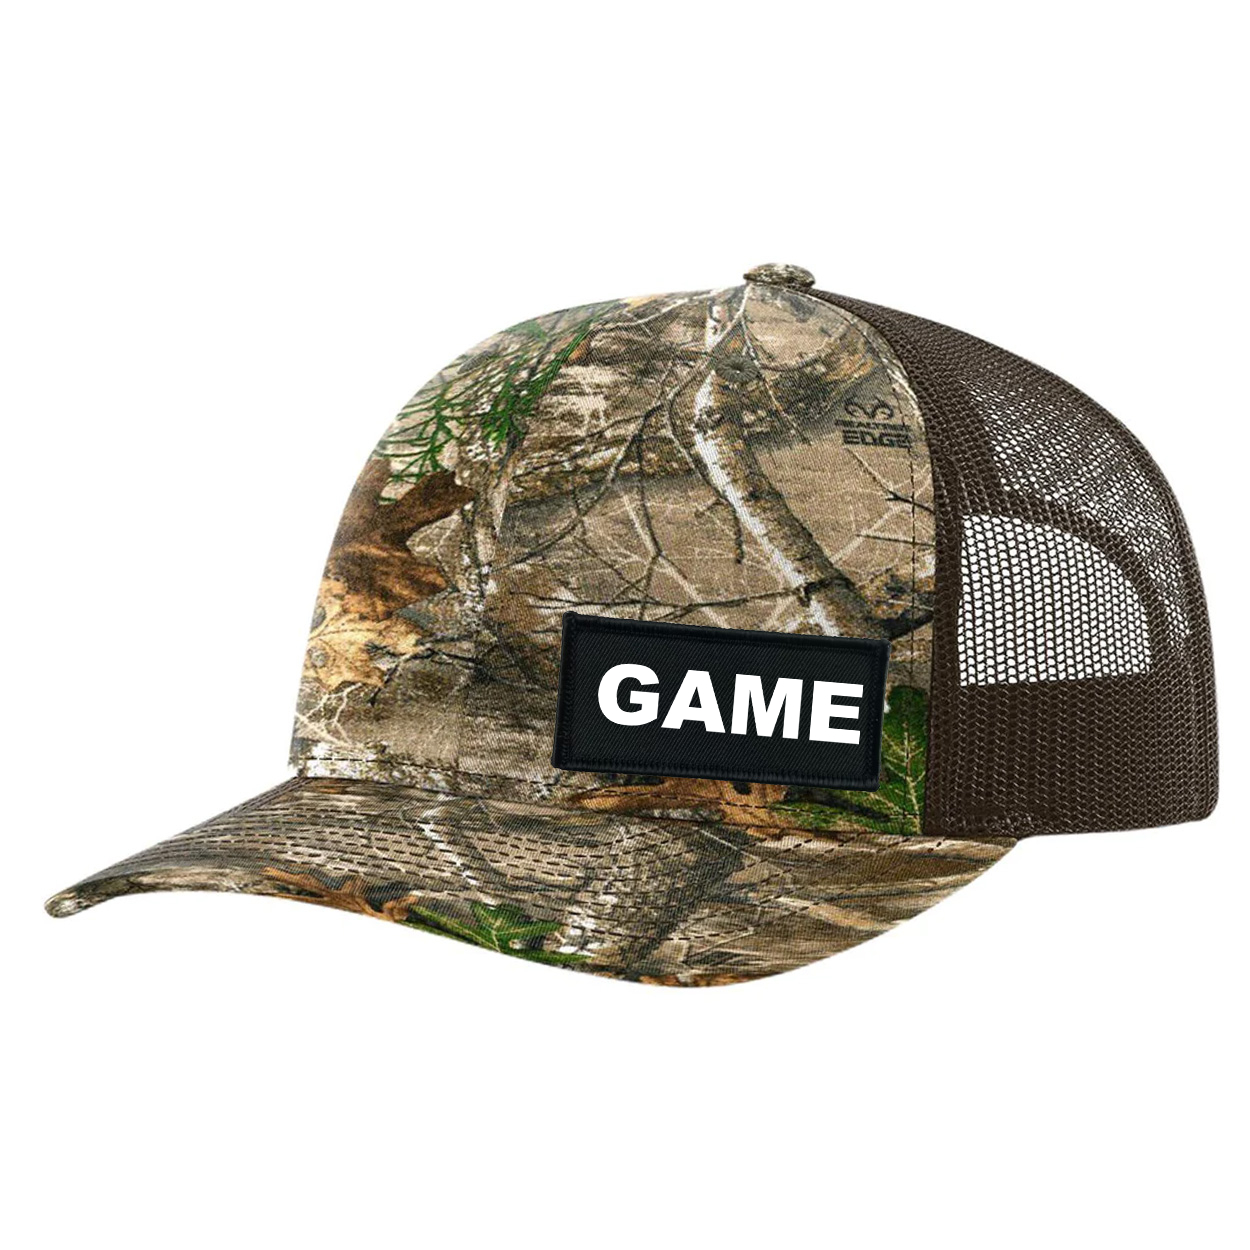 Game Brand Logo Night Out Woven Patch Snapback Trucker Hat Realtree Edge/ Brown